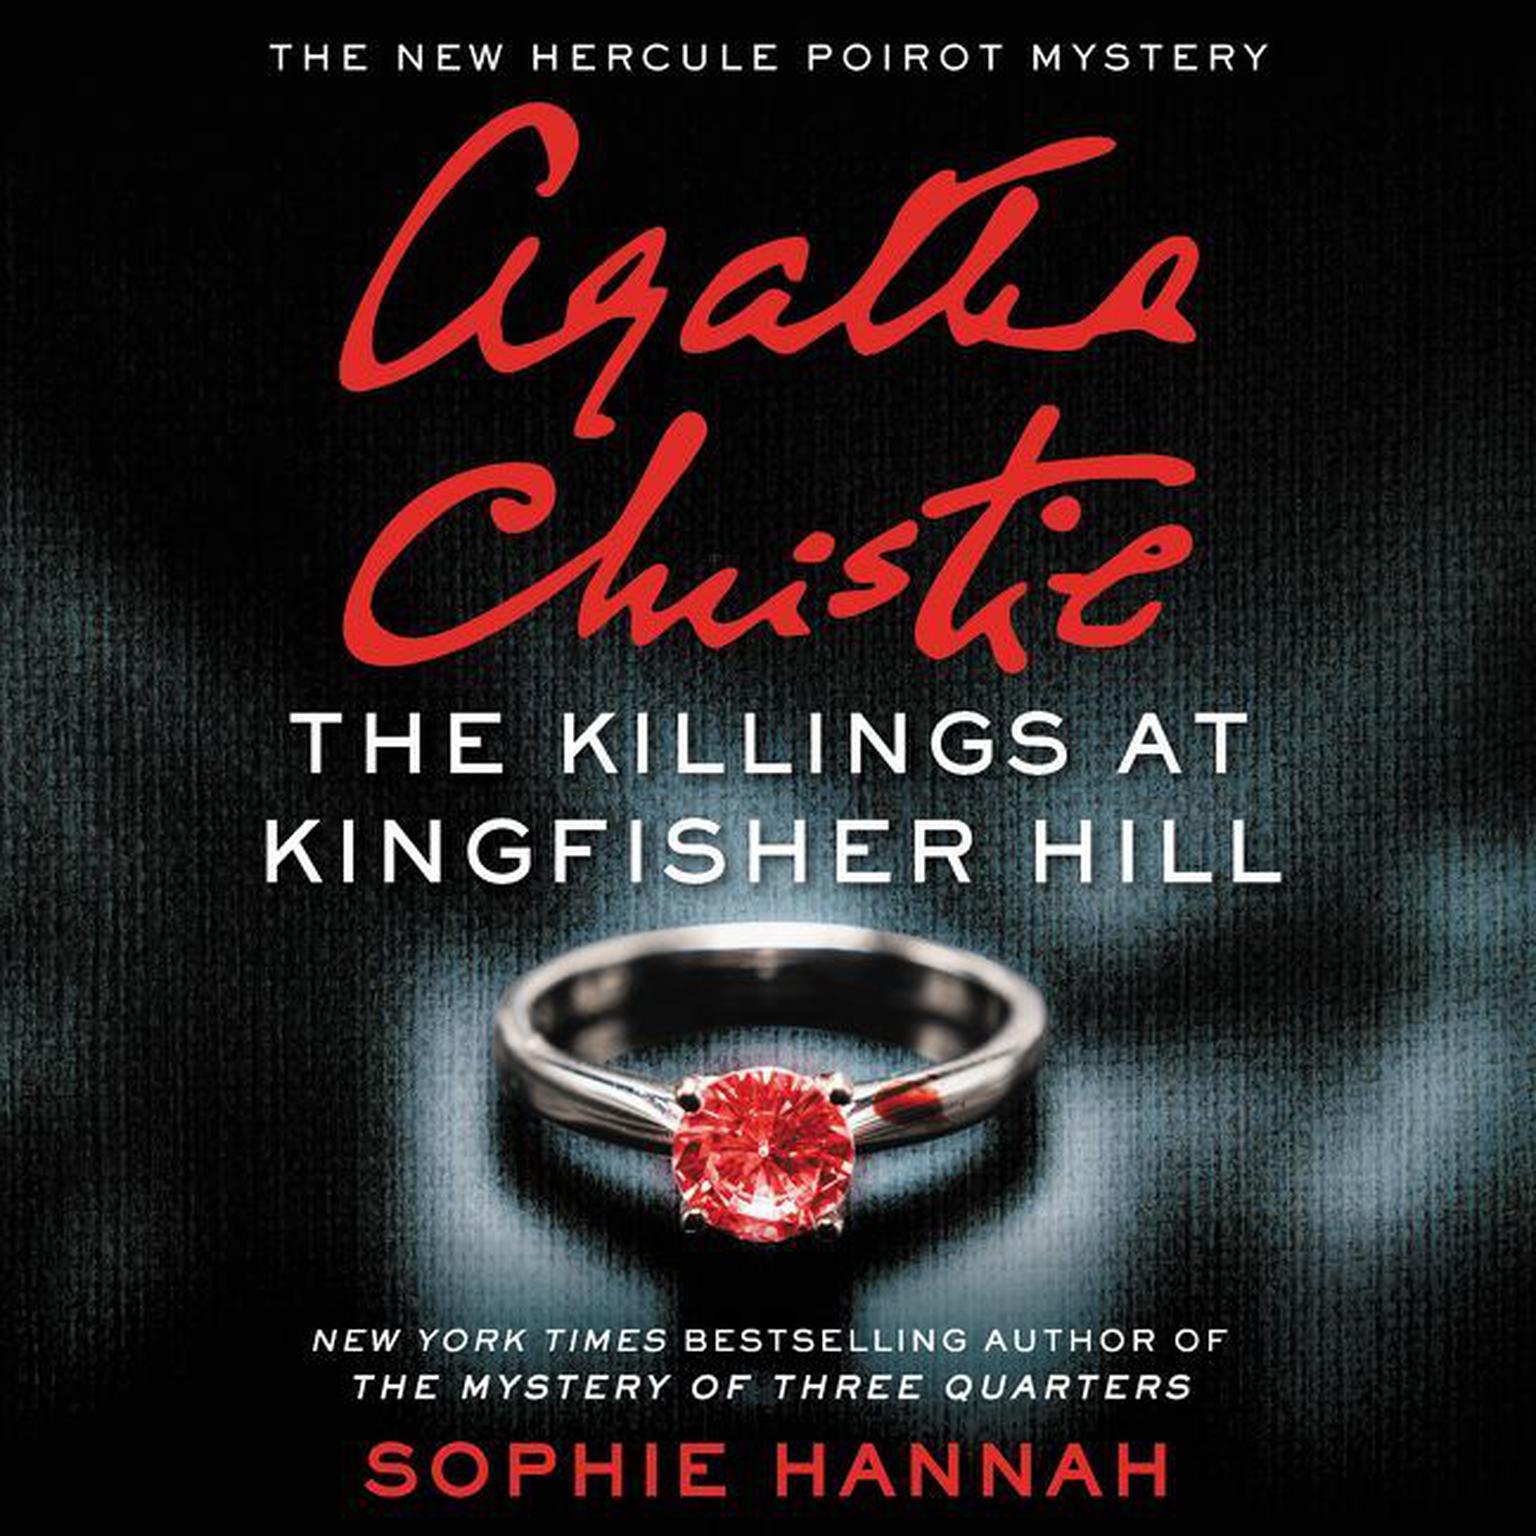 The Killings at Kingfisher Hill: The New Hercule Poirot Mystery Audiobook, by Sophie Hannah